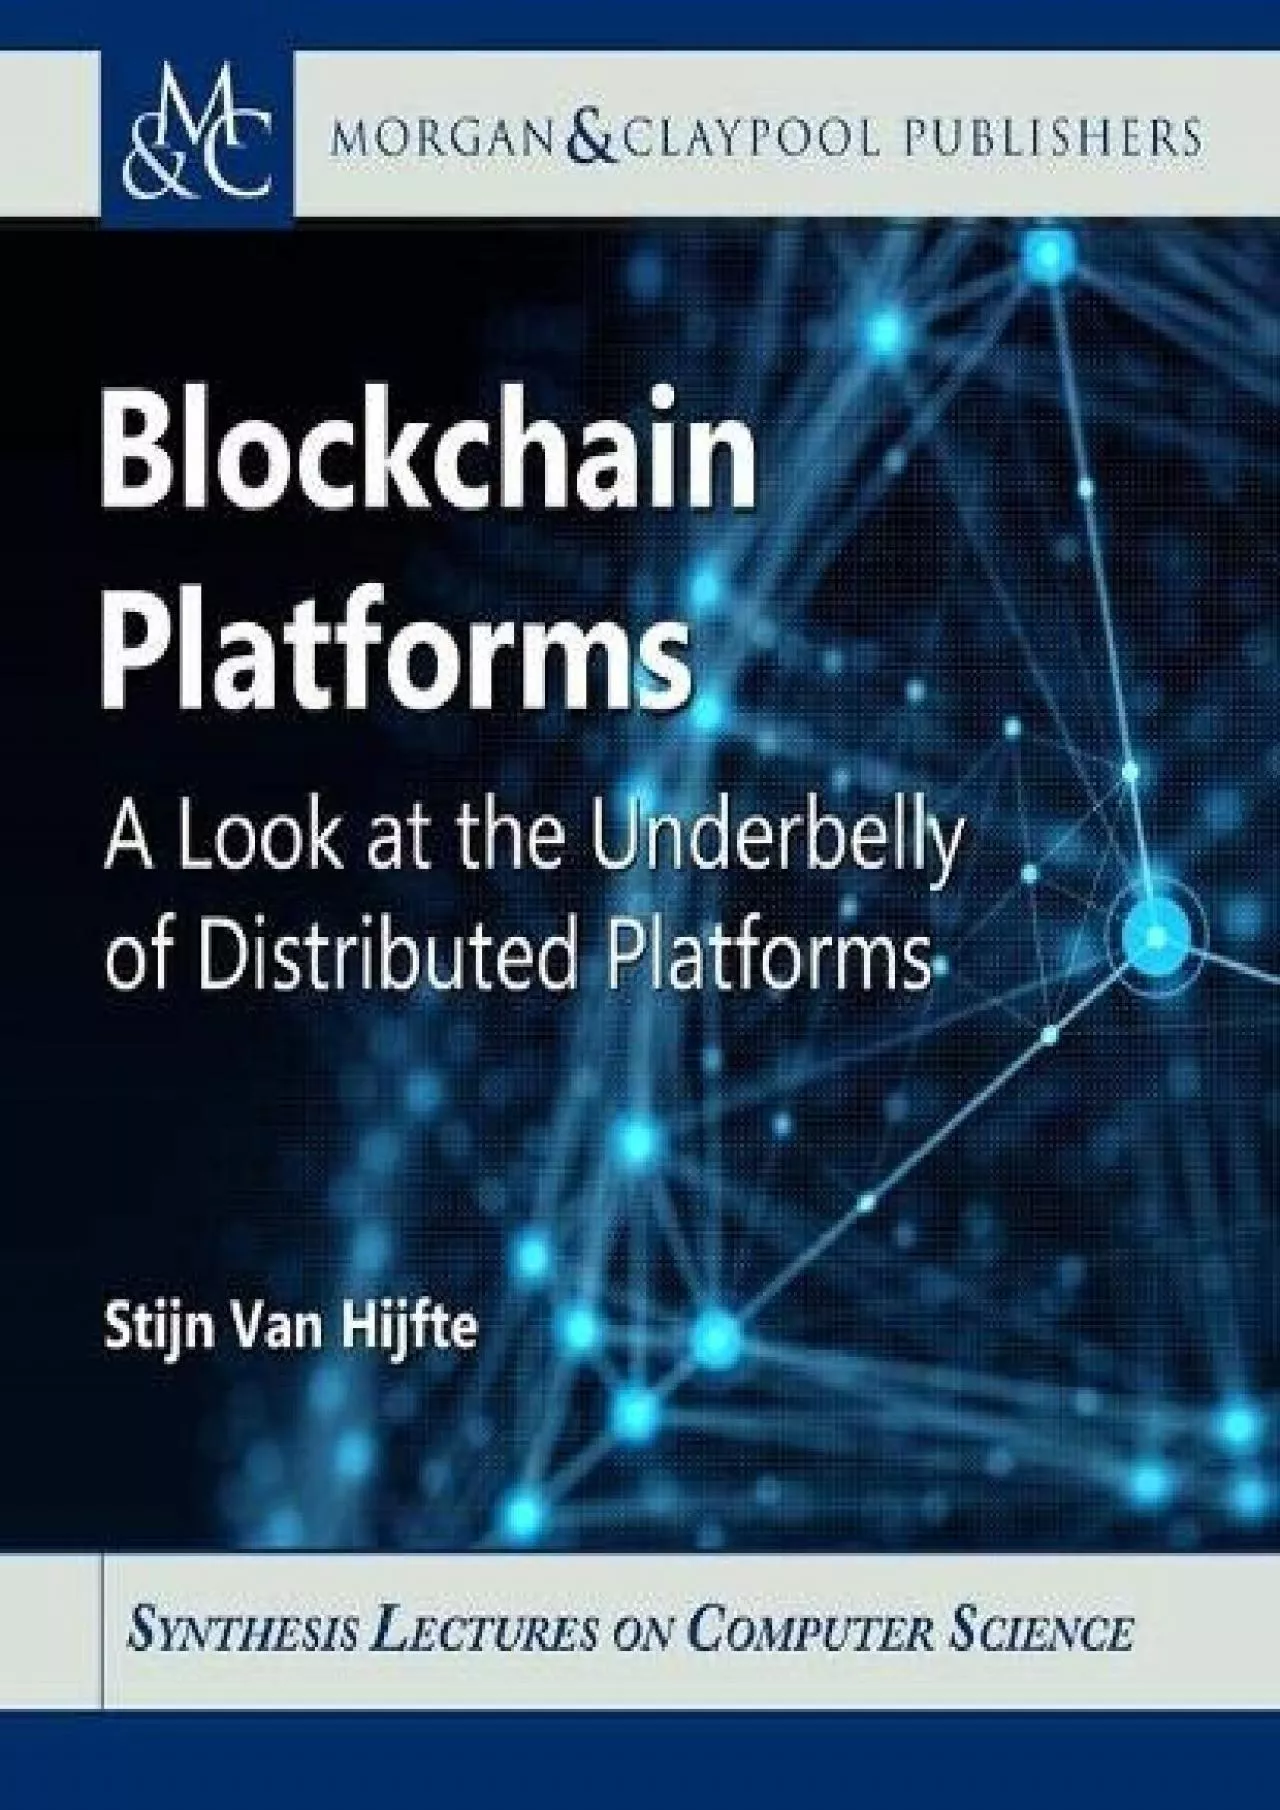 (BOOS)-Blockchain Platforms: A Look at the Underbelly of Distributed Platforms (Synthesis